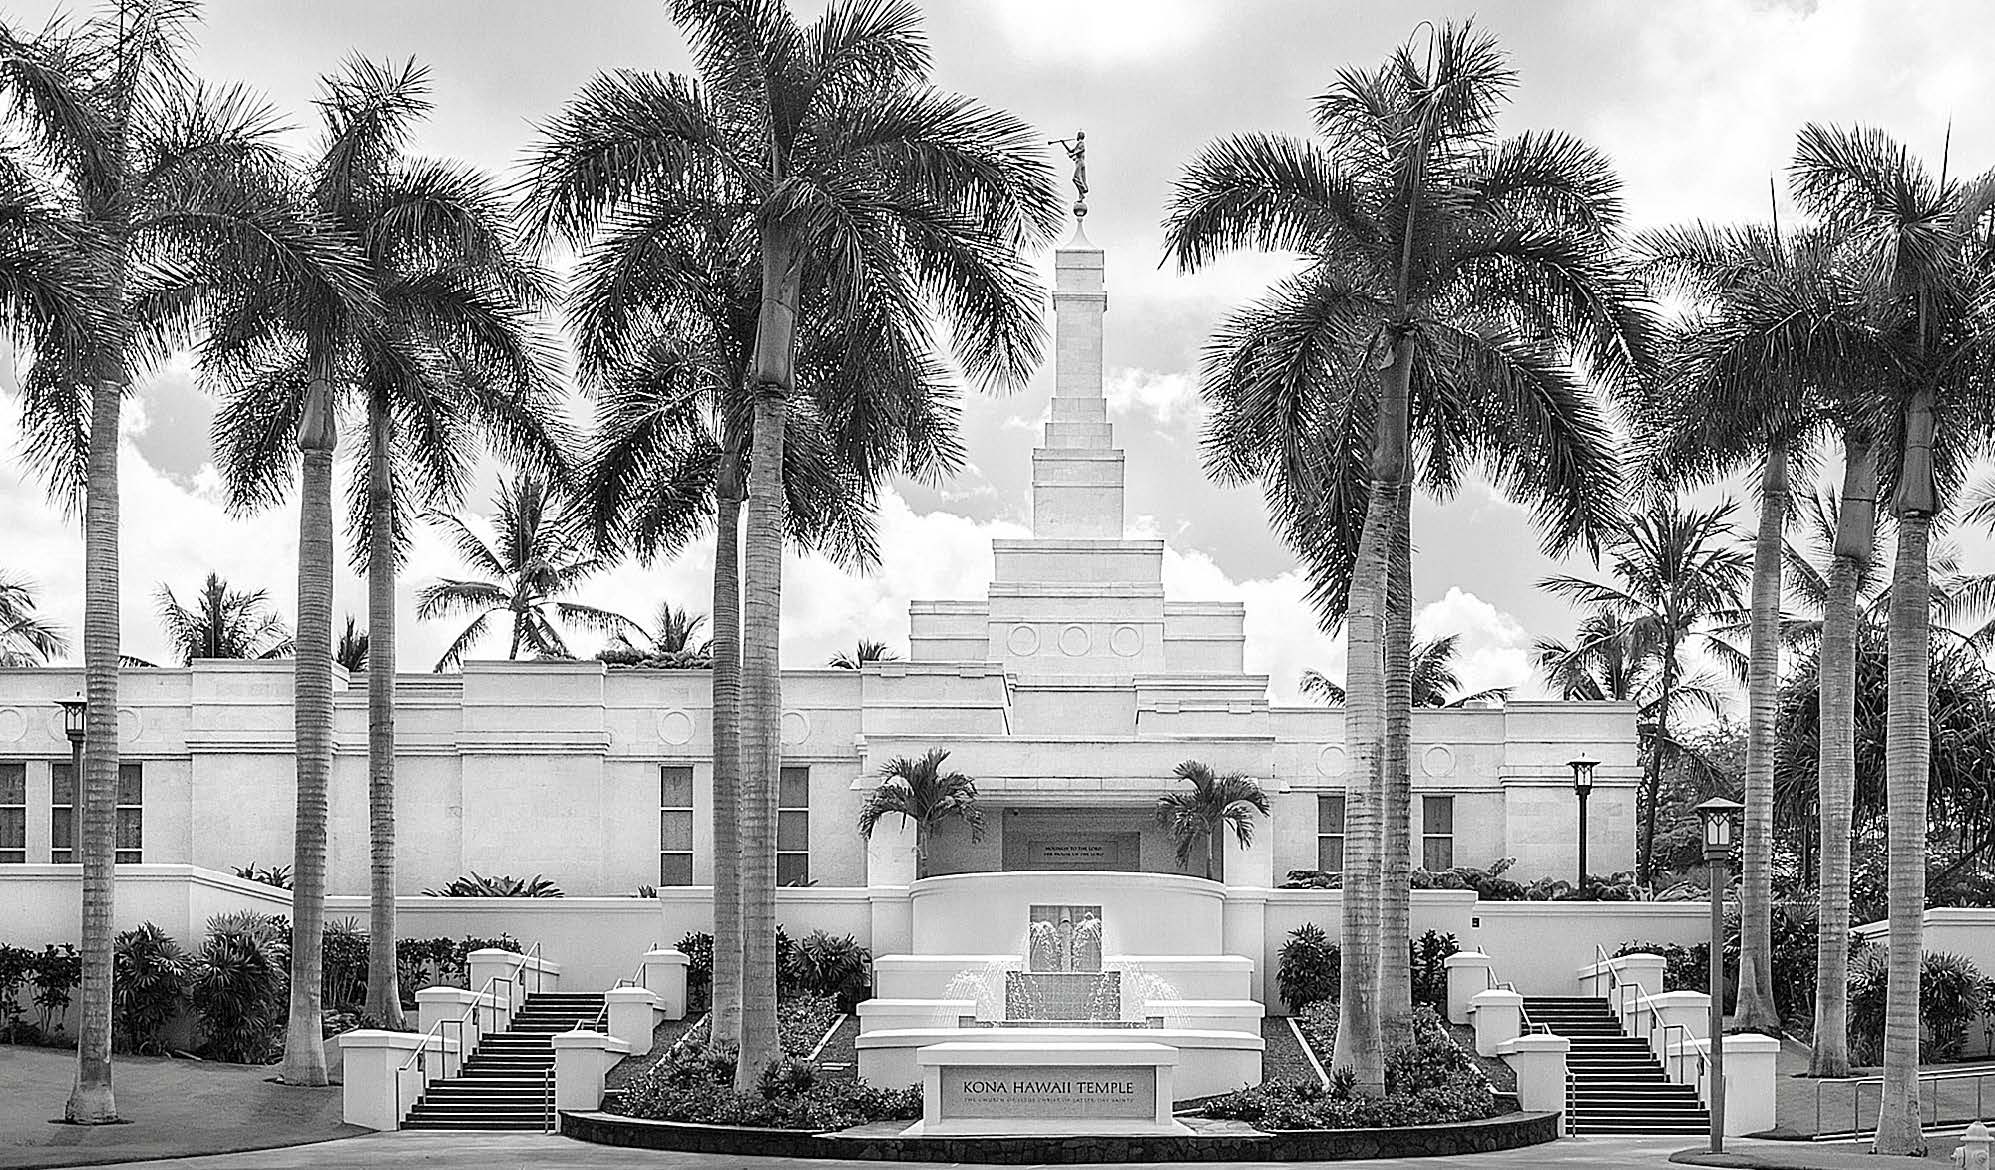 The 1998 announcement of a temple in Kona, Hawai‘i (the second temple in what was then the 42nd most populous US state), was clearly a compliment to the Saints in Hawai‘i. Above photo of Laie Hawaii Temple by Monique Saenz courtesy of BYU–Hawaii. Photo of Kona Hawaii Temple courtesy of Denise Bird, birdinparadise.com.